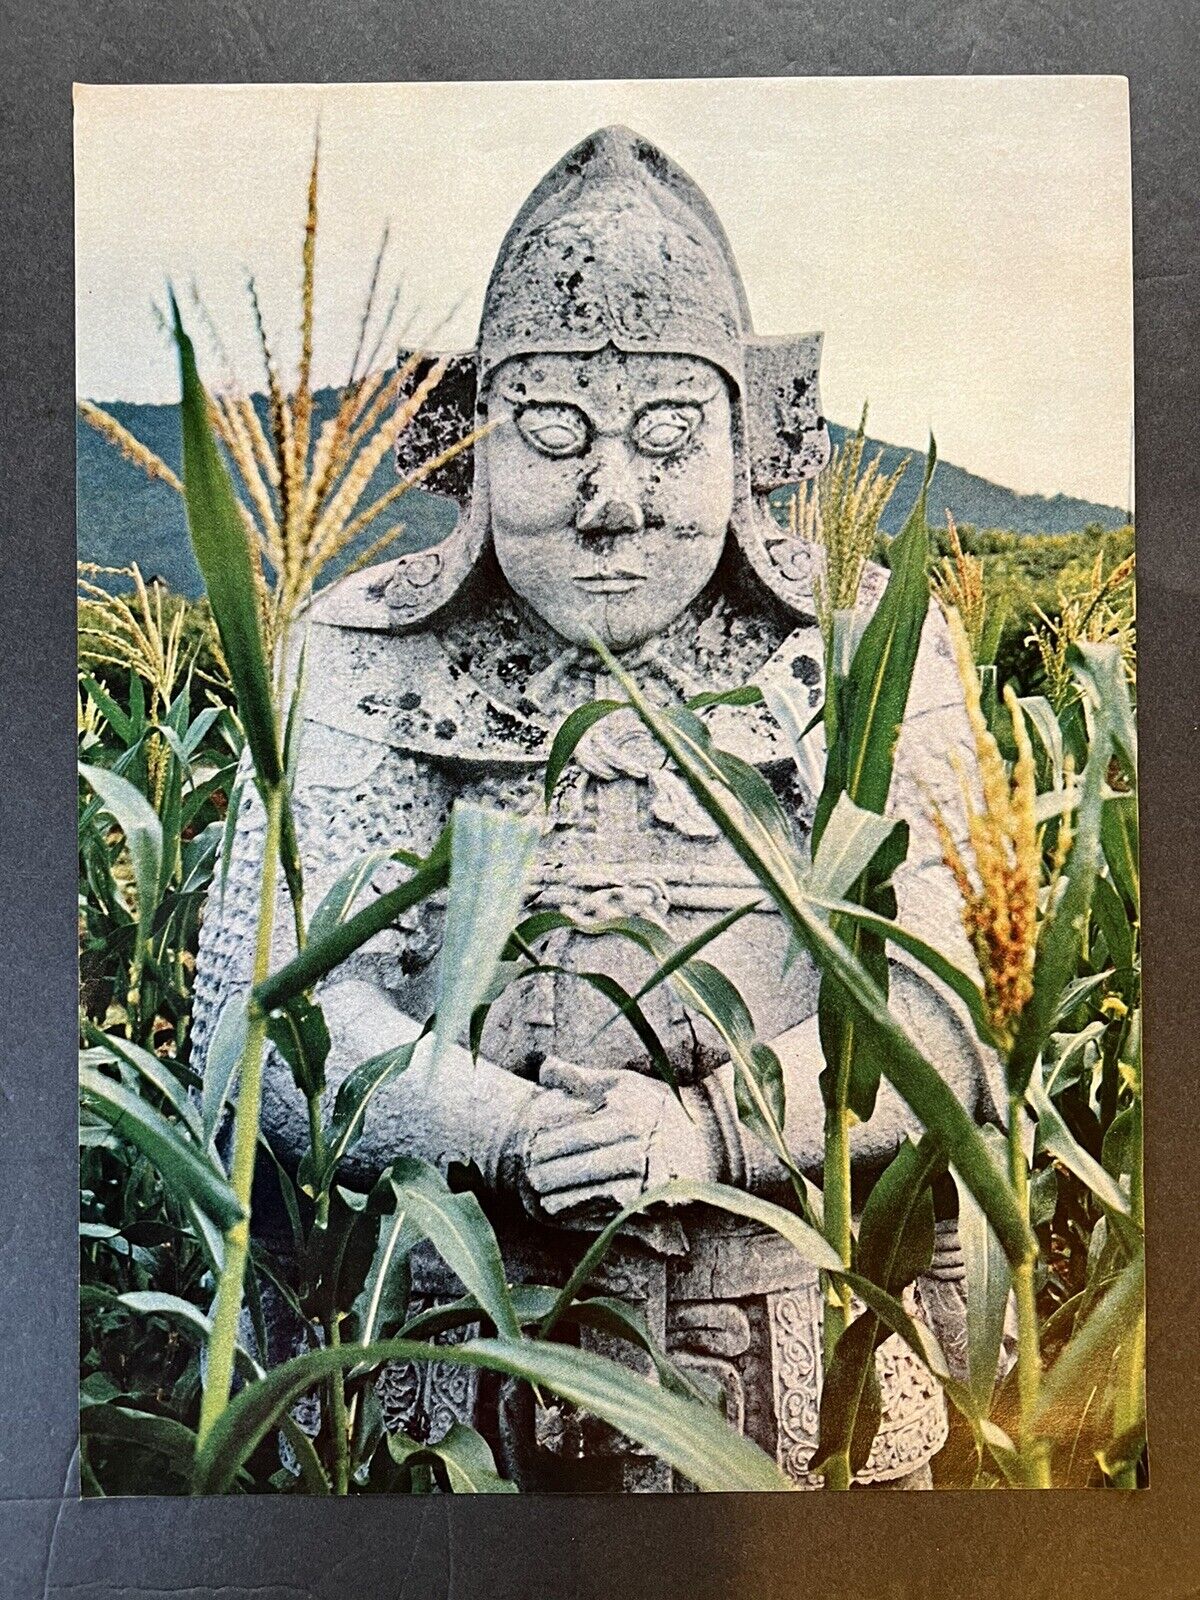 Vtg 1960s Full-Page Photo Art - Chinese Sculpture, Tomb Carving Western Dynasty